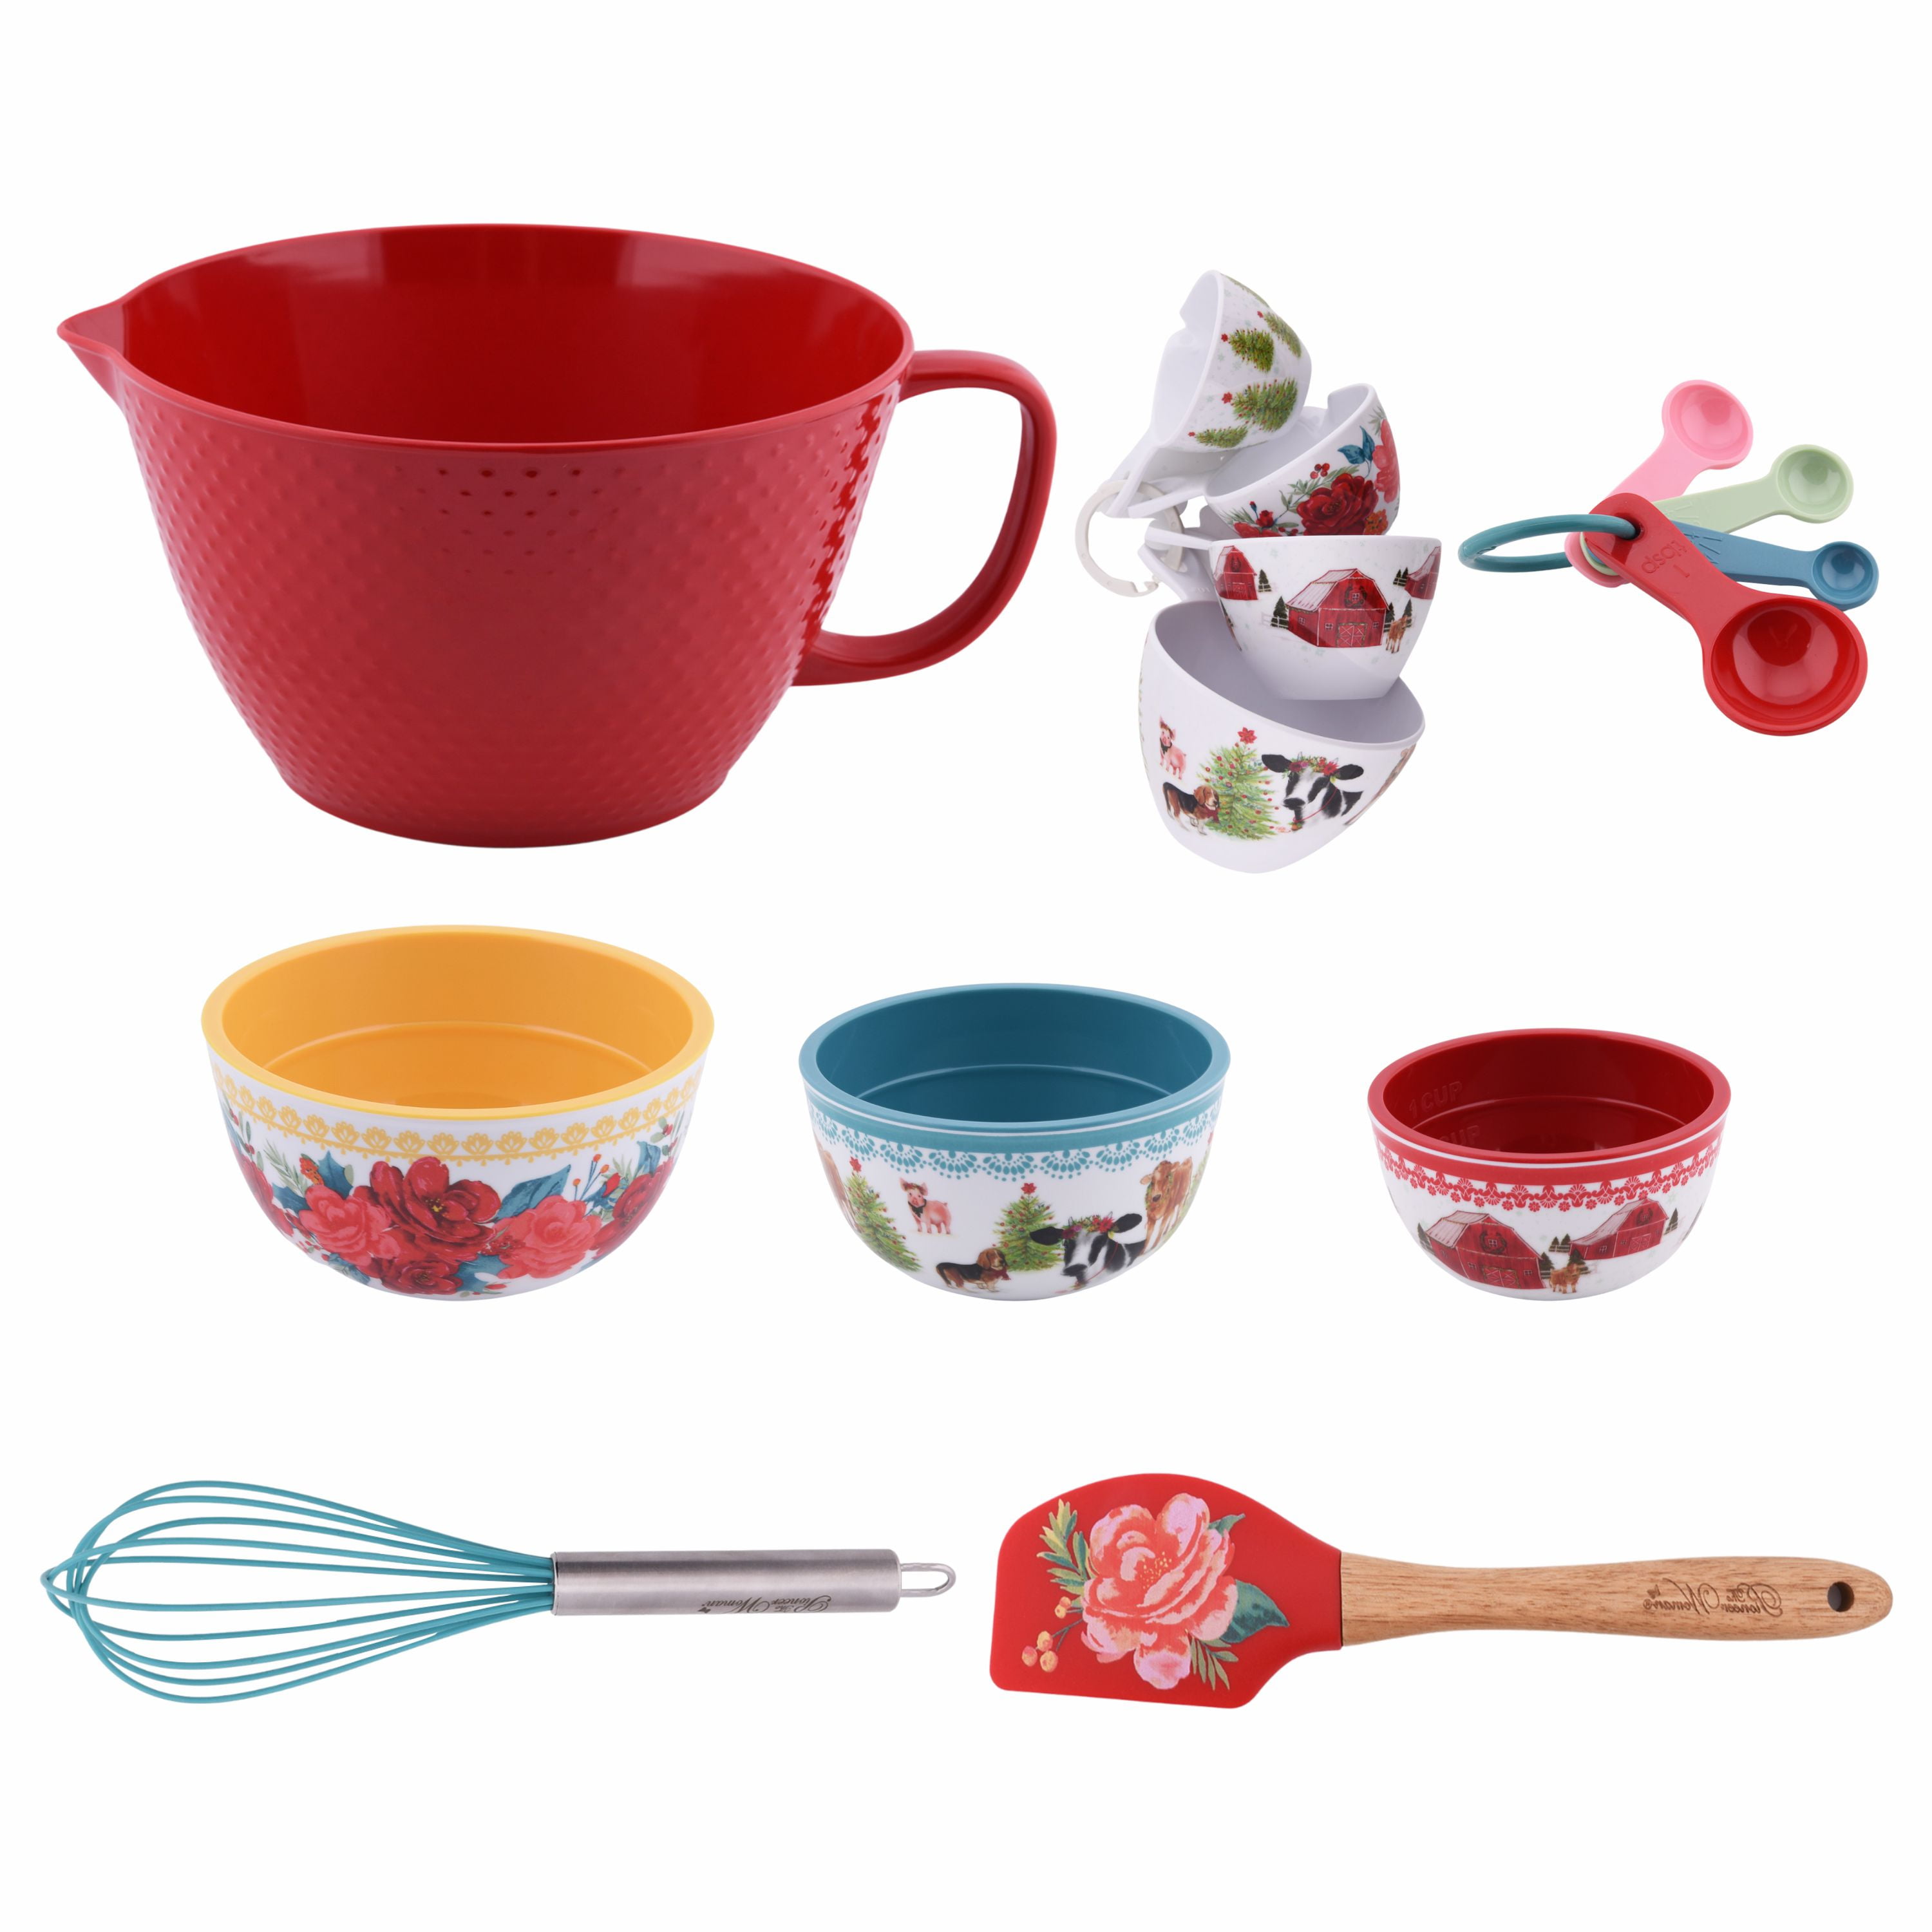 Pioneer Woman Dishes Deals  14-Piece Baking Set Just $19.96!